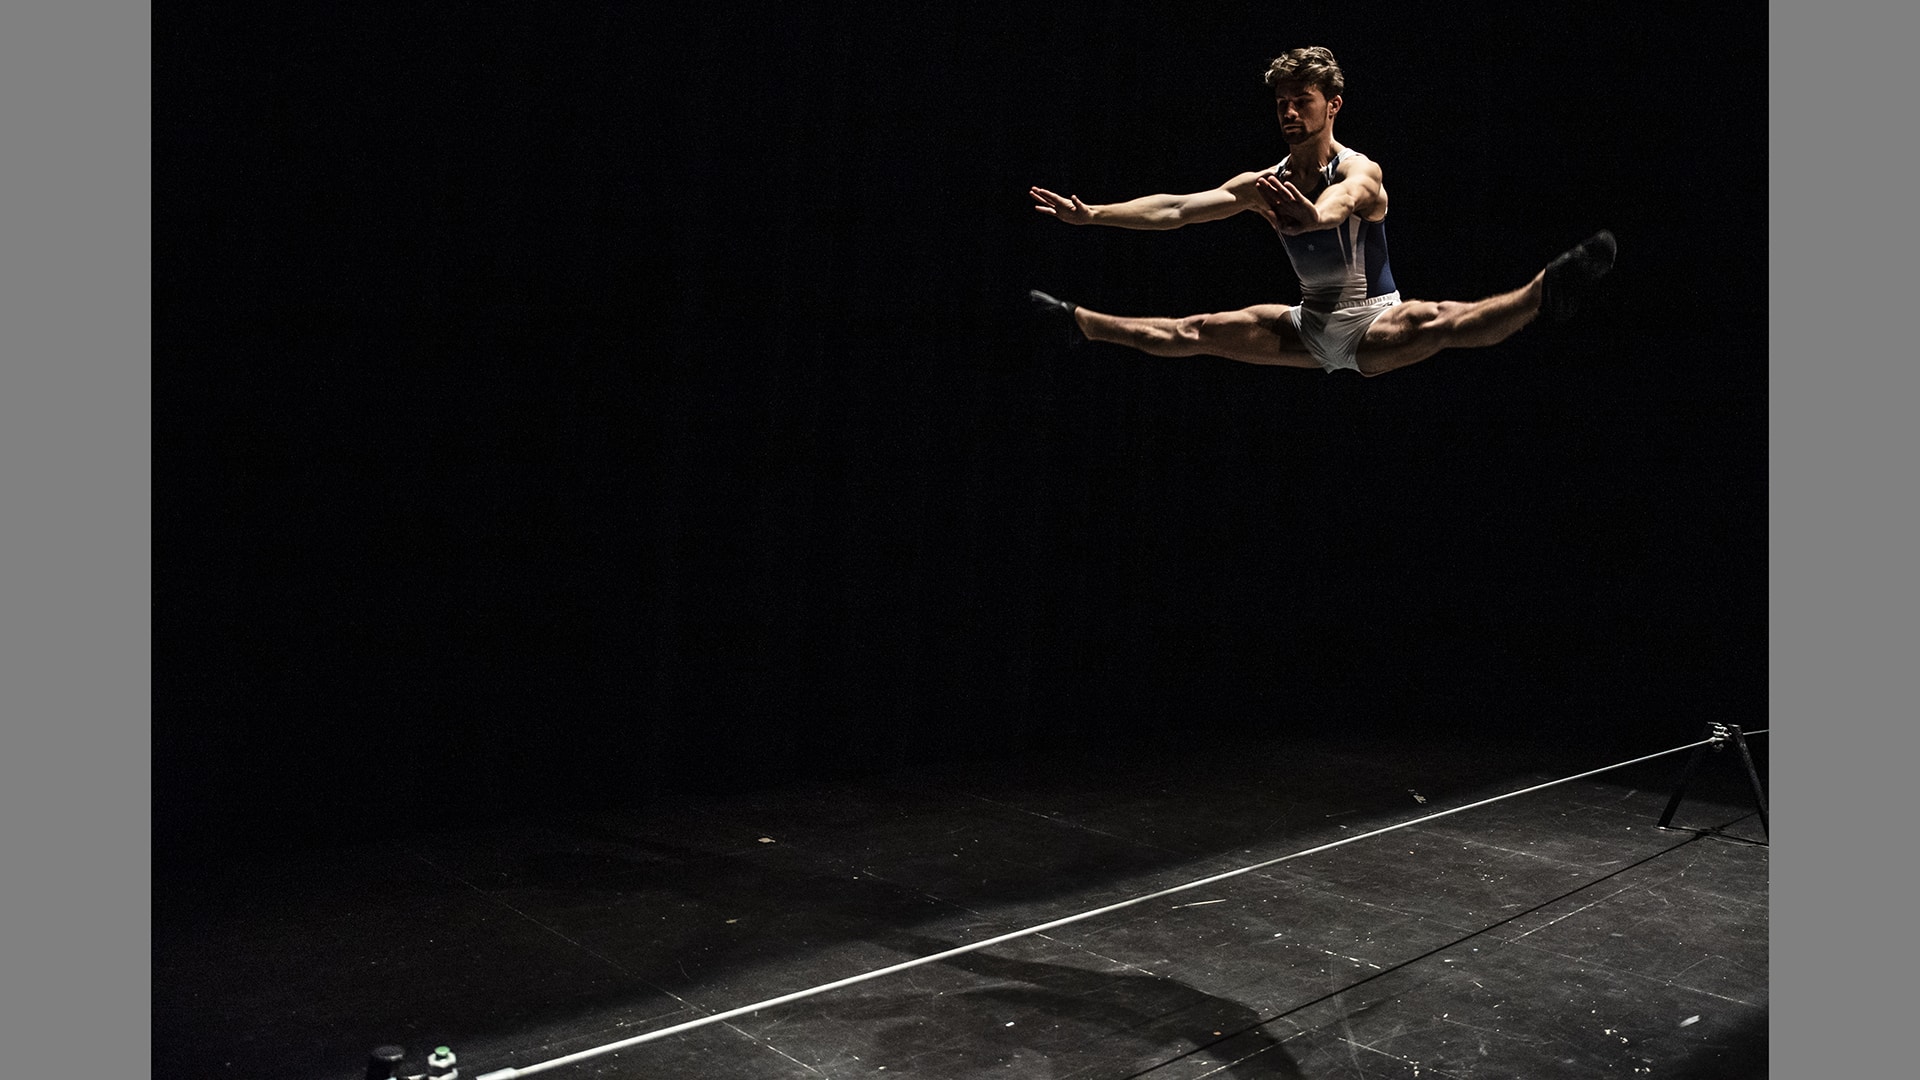 Circus artist Simon-James jumps high, his legs out in a split. He is high above the stage